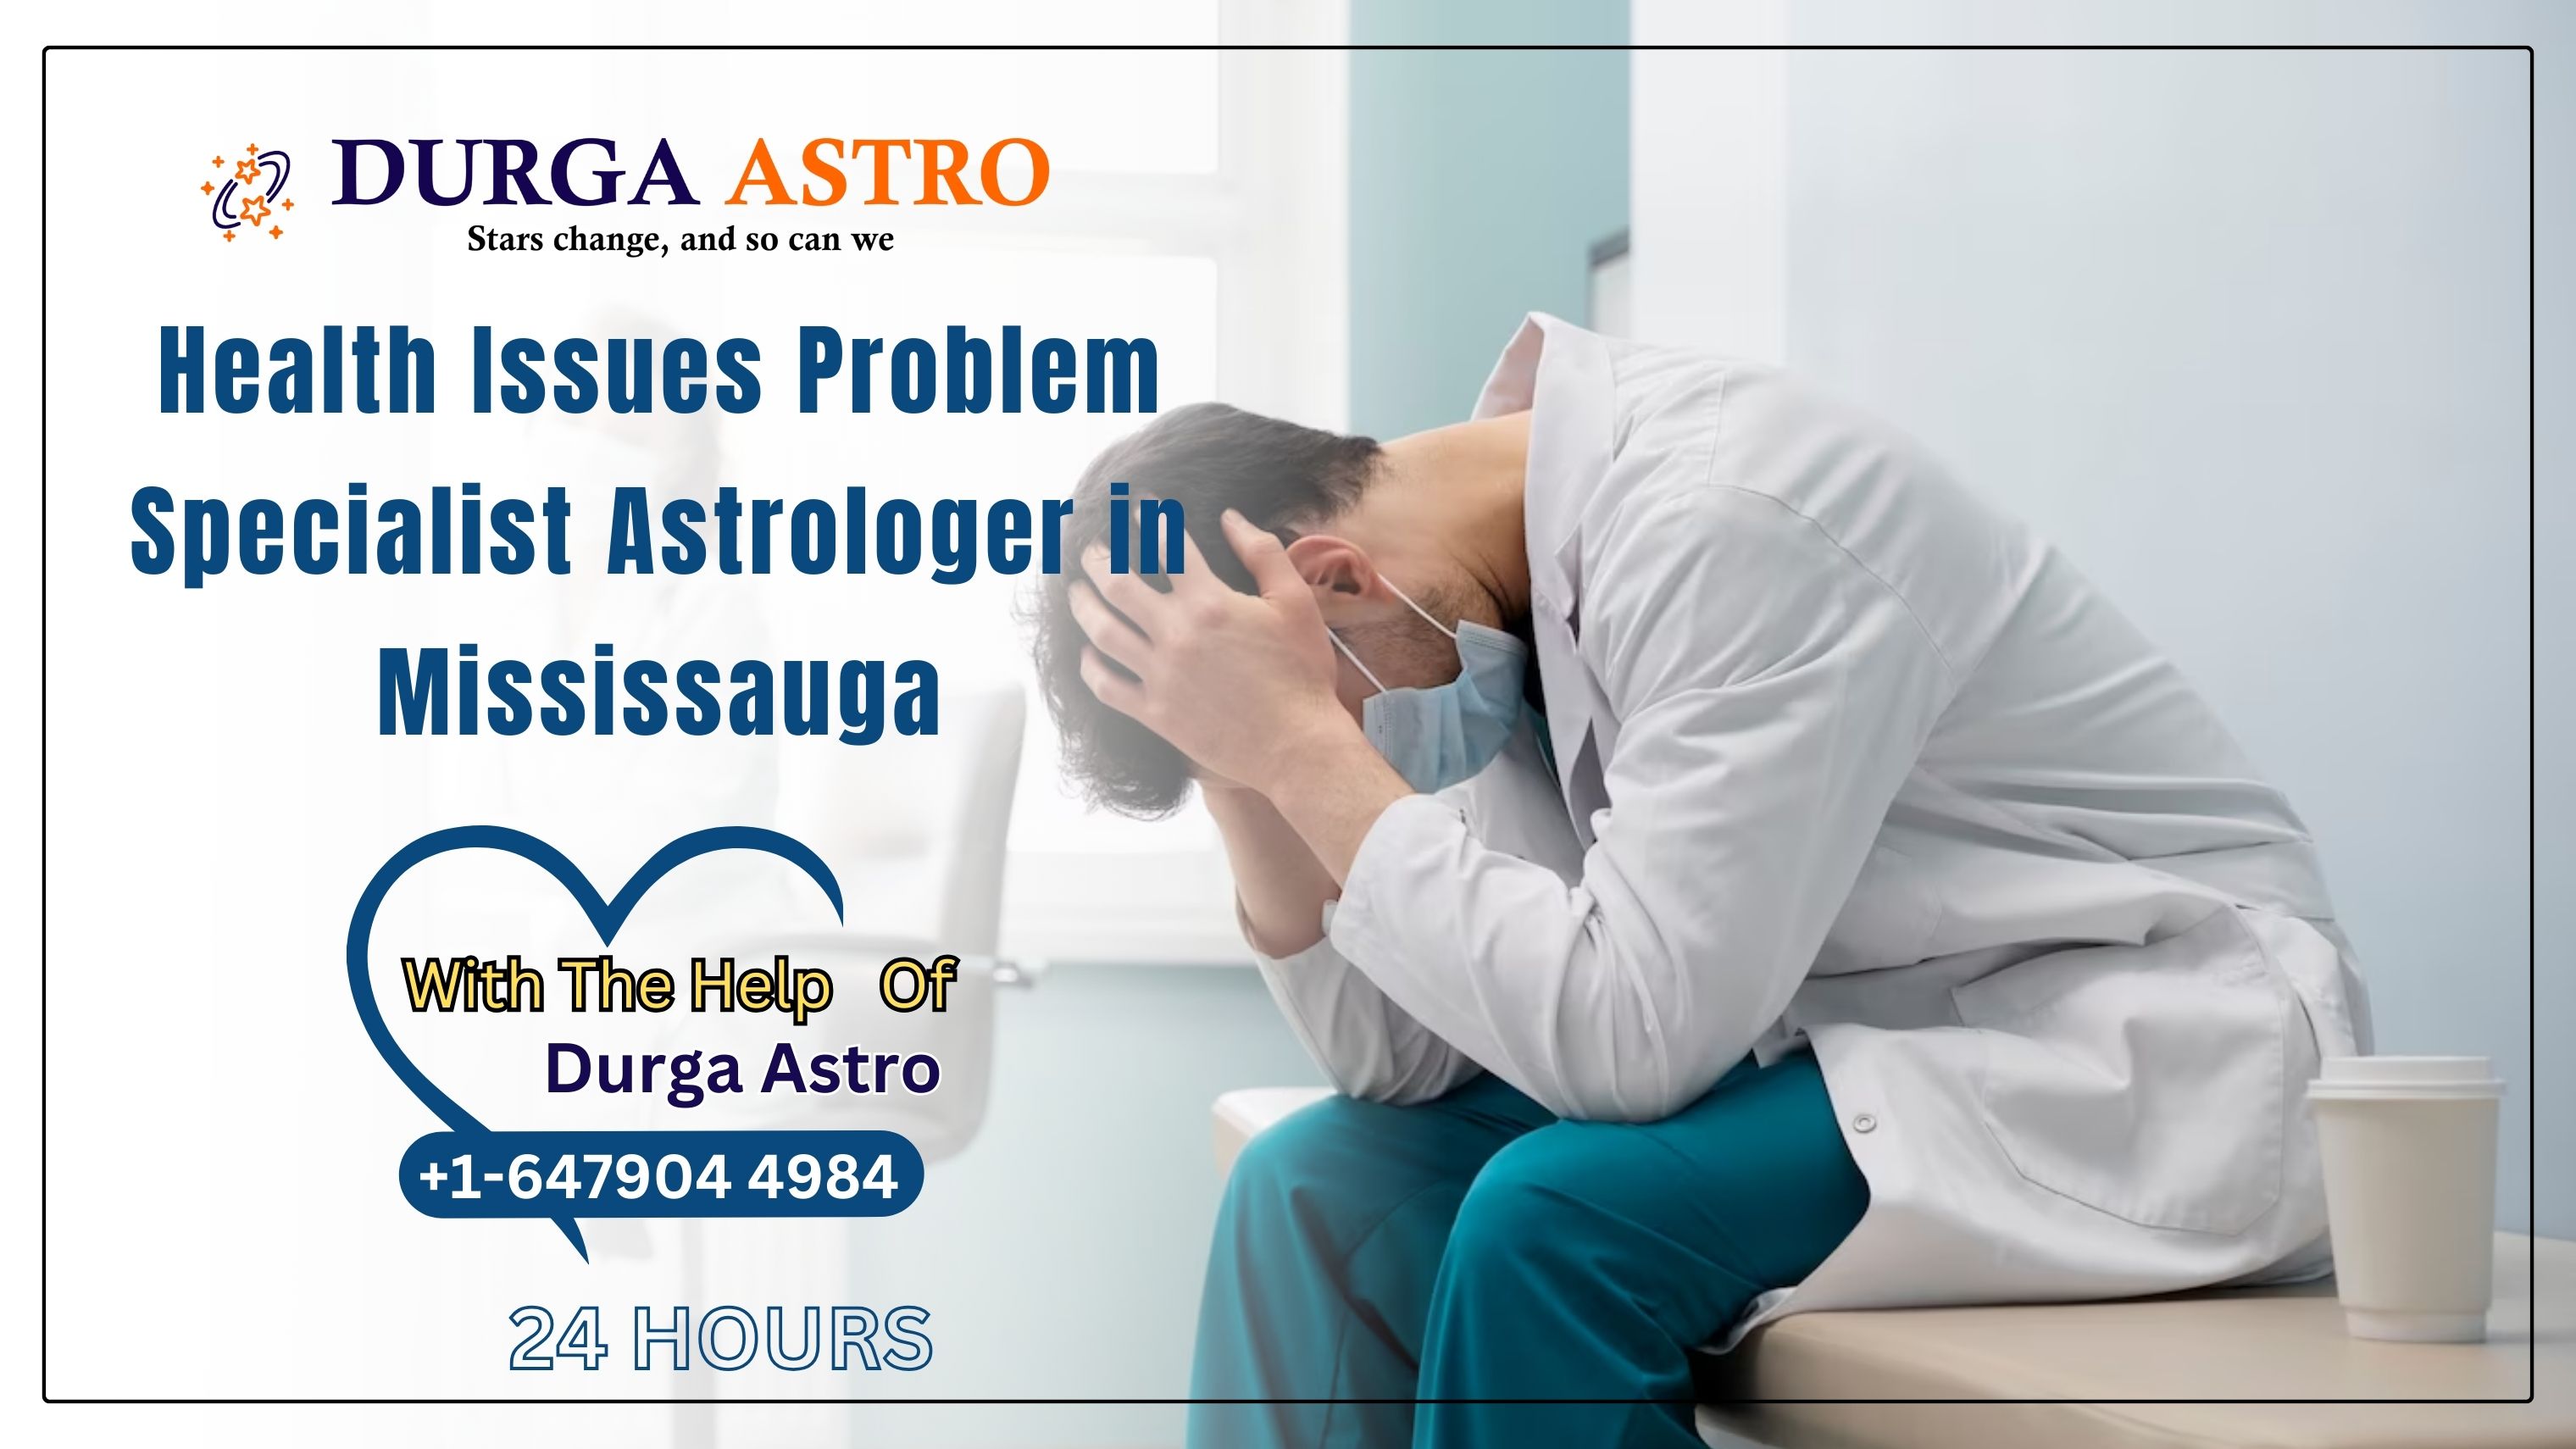 Health Issues Problem Specialist Astrologer in Mississauga